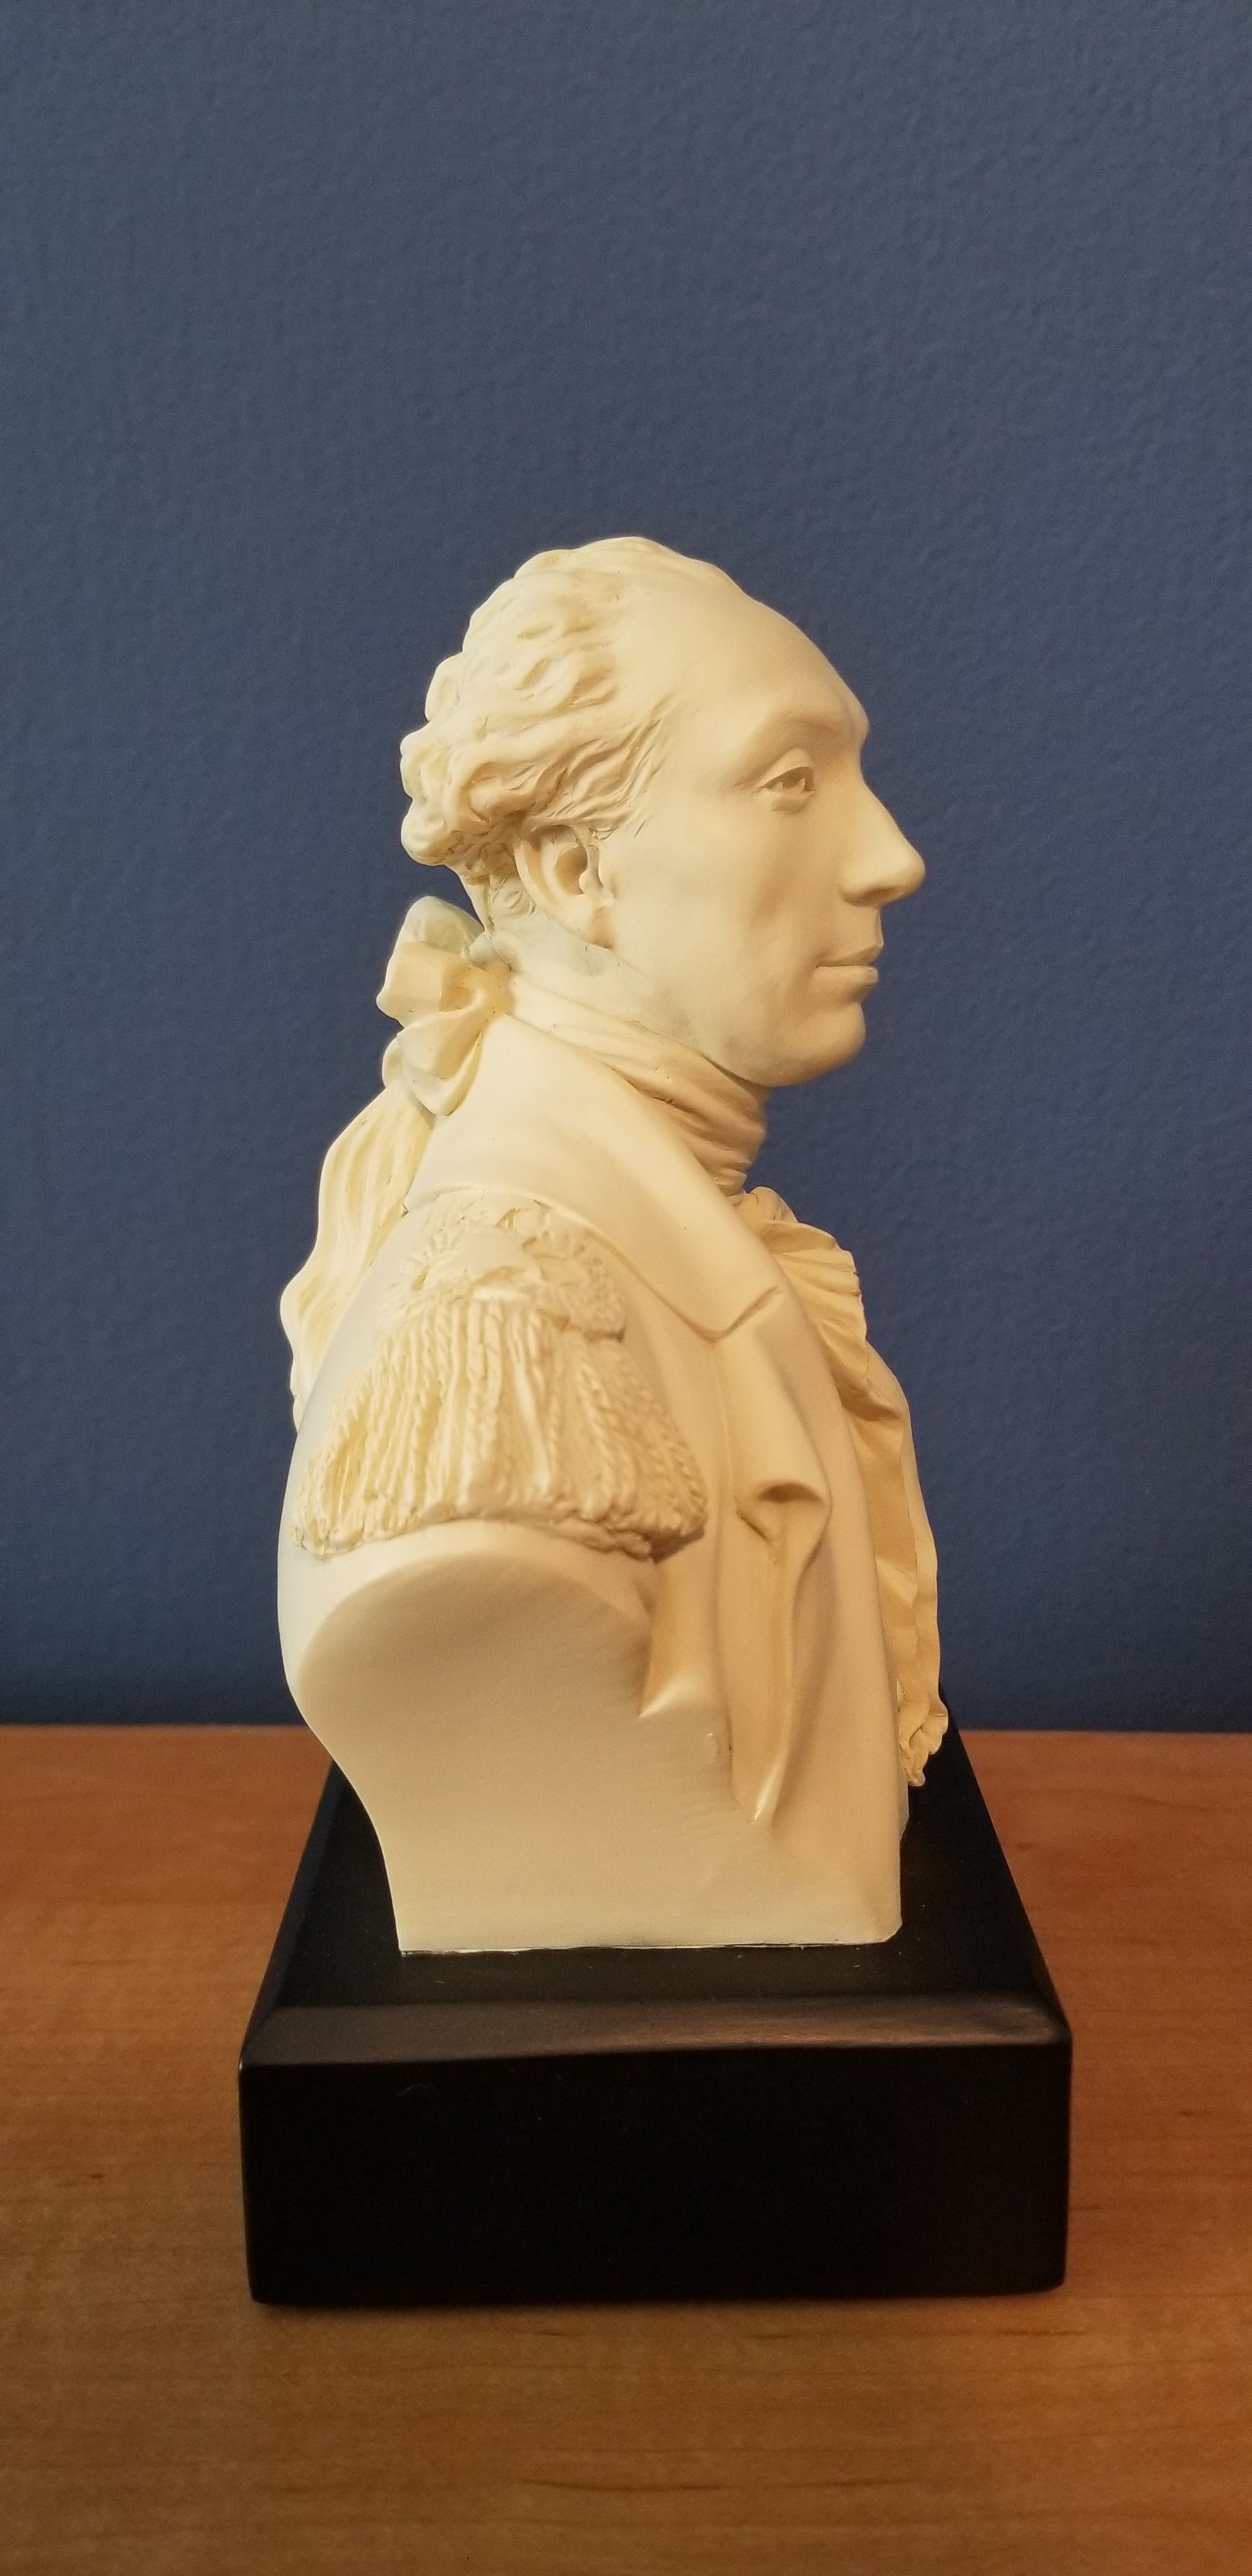 Bust of Lafayette. Bust of the Marquis de Lafayette fashioned after Houdon's bust of Lafayette. Statue of Lafayette. Statue of the Marquis de Lafayette.